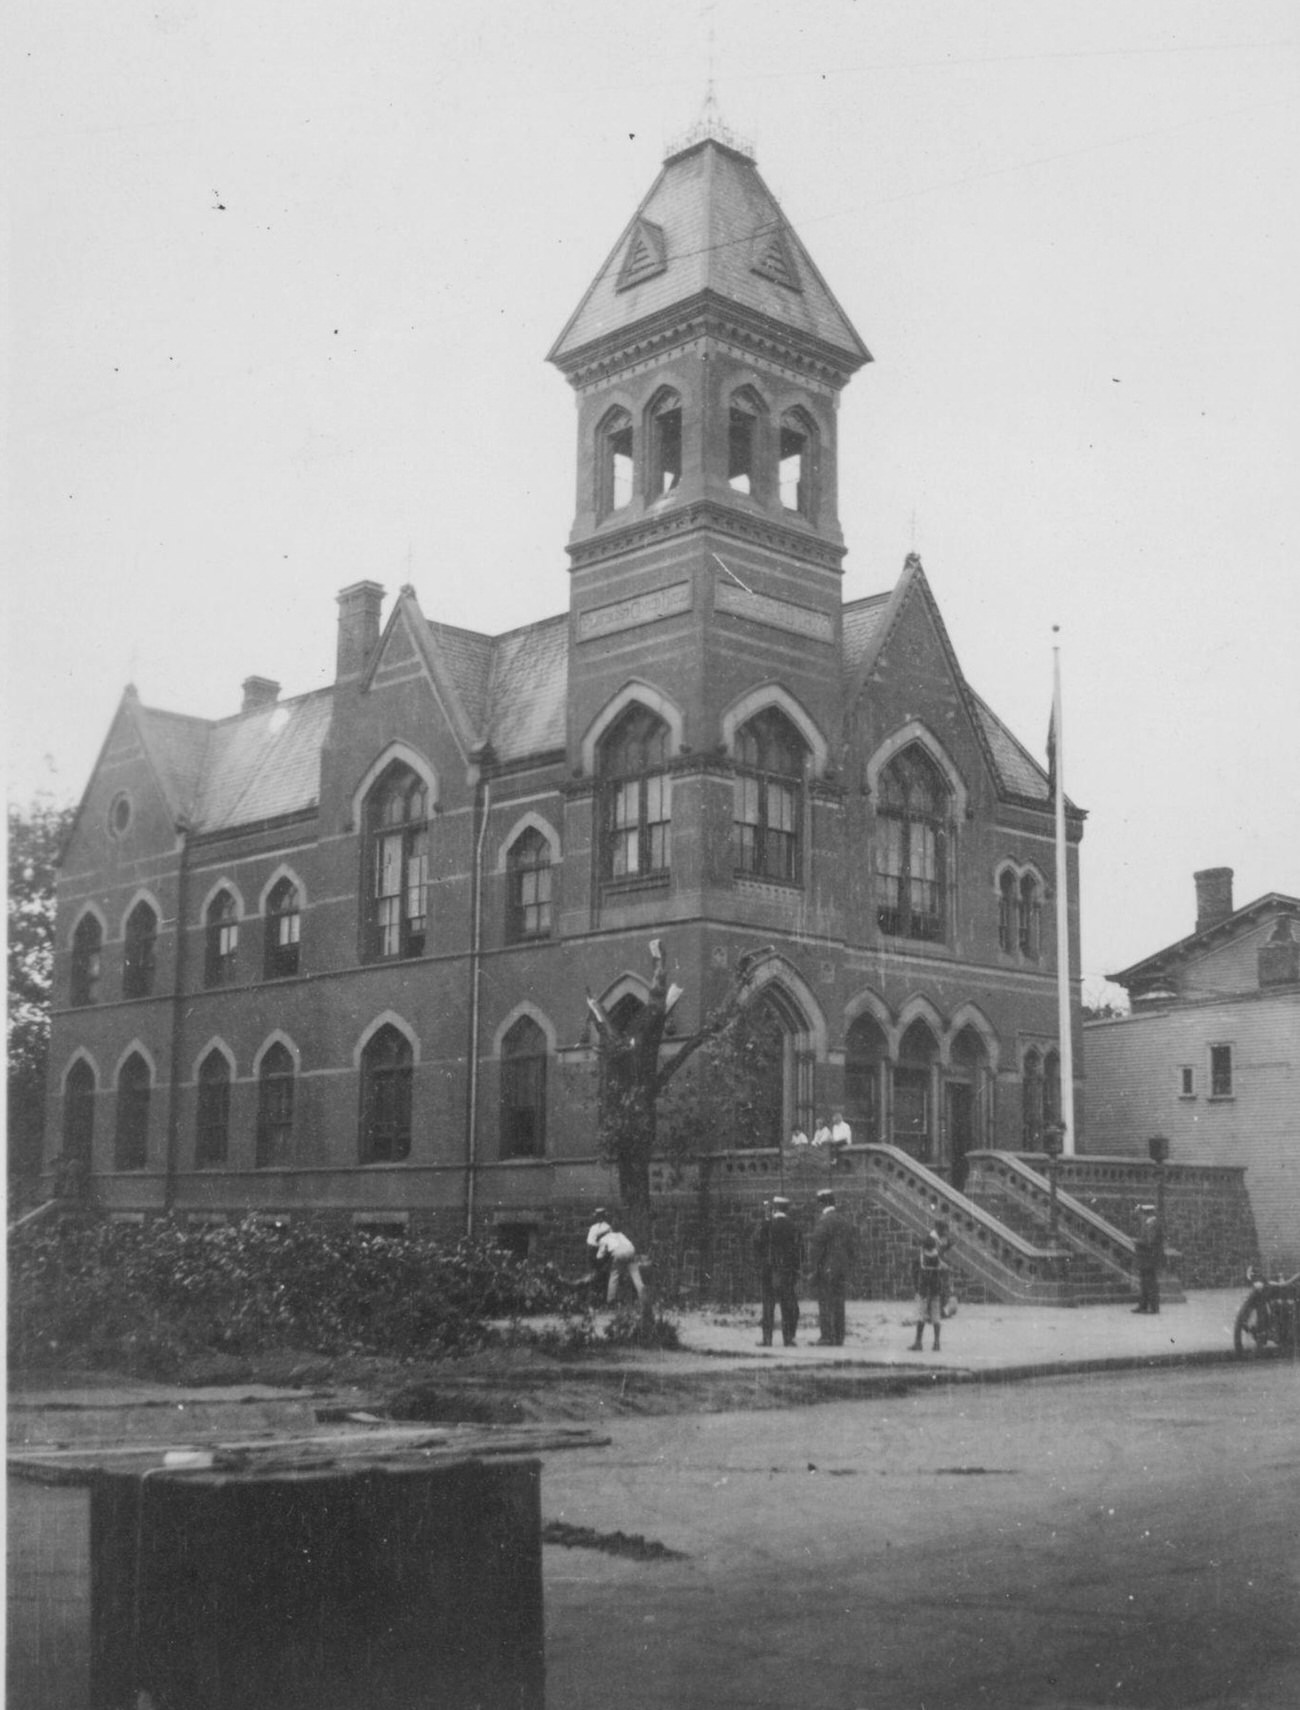 Flatbush Town Hall, Erected 1875, South Side Of Flatbush Avenue And Bedford Avenue, Near Suydam Avenue Courts And Police Station, 1922.